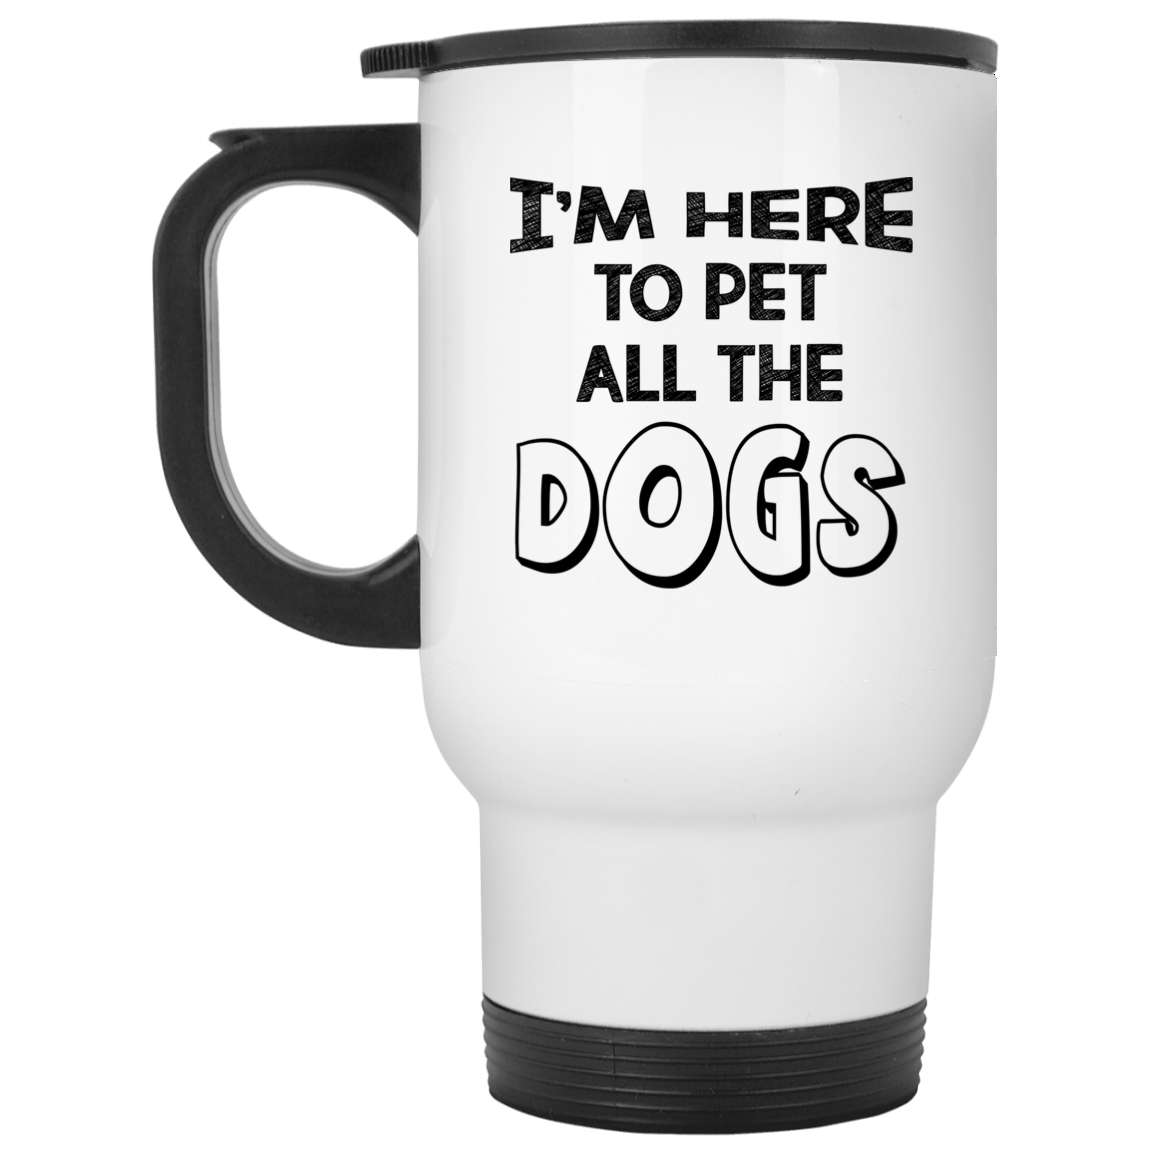 I'm Here To Pet All The Dogs - Mugs.